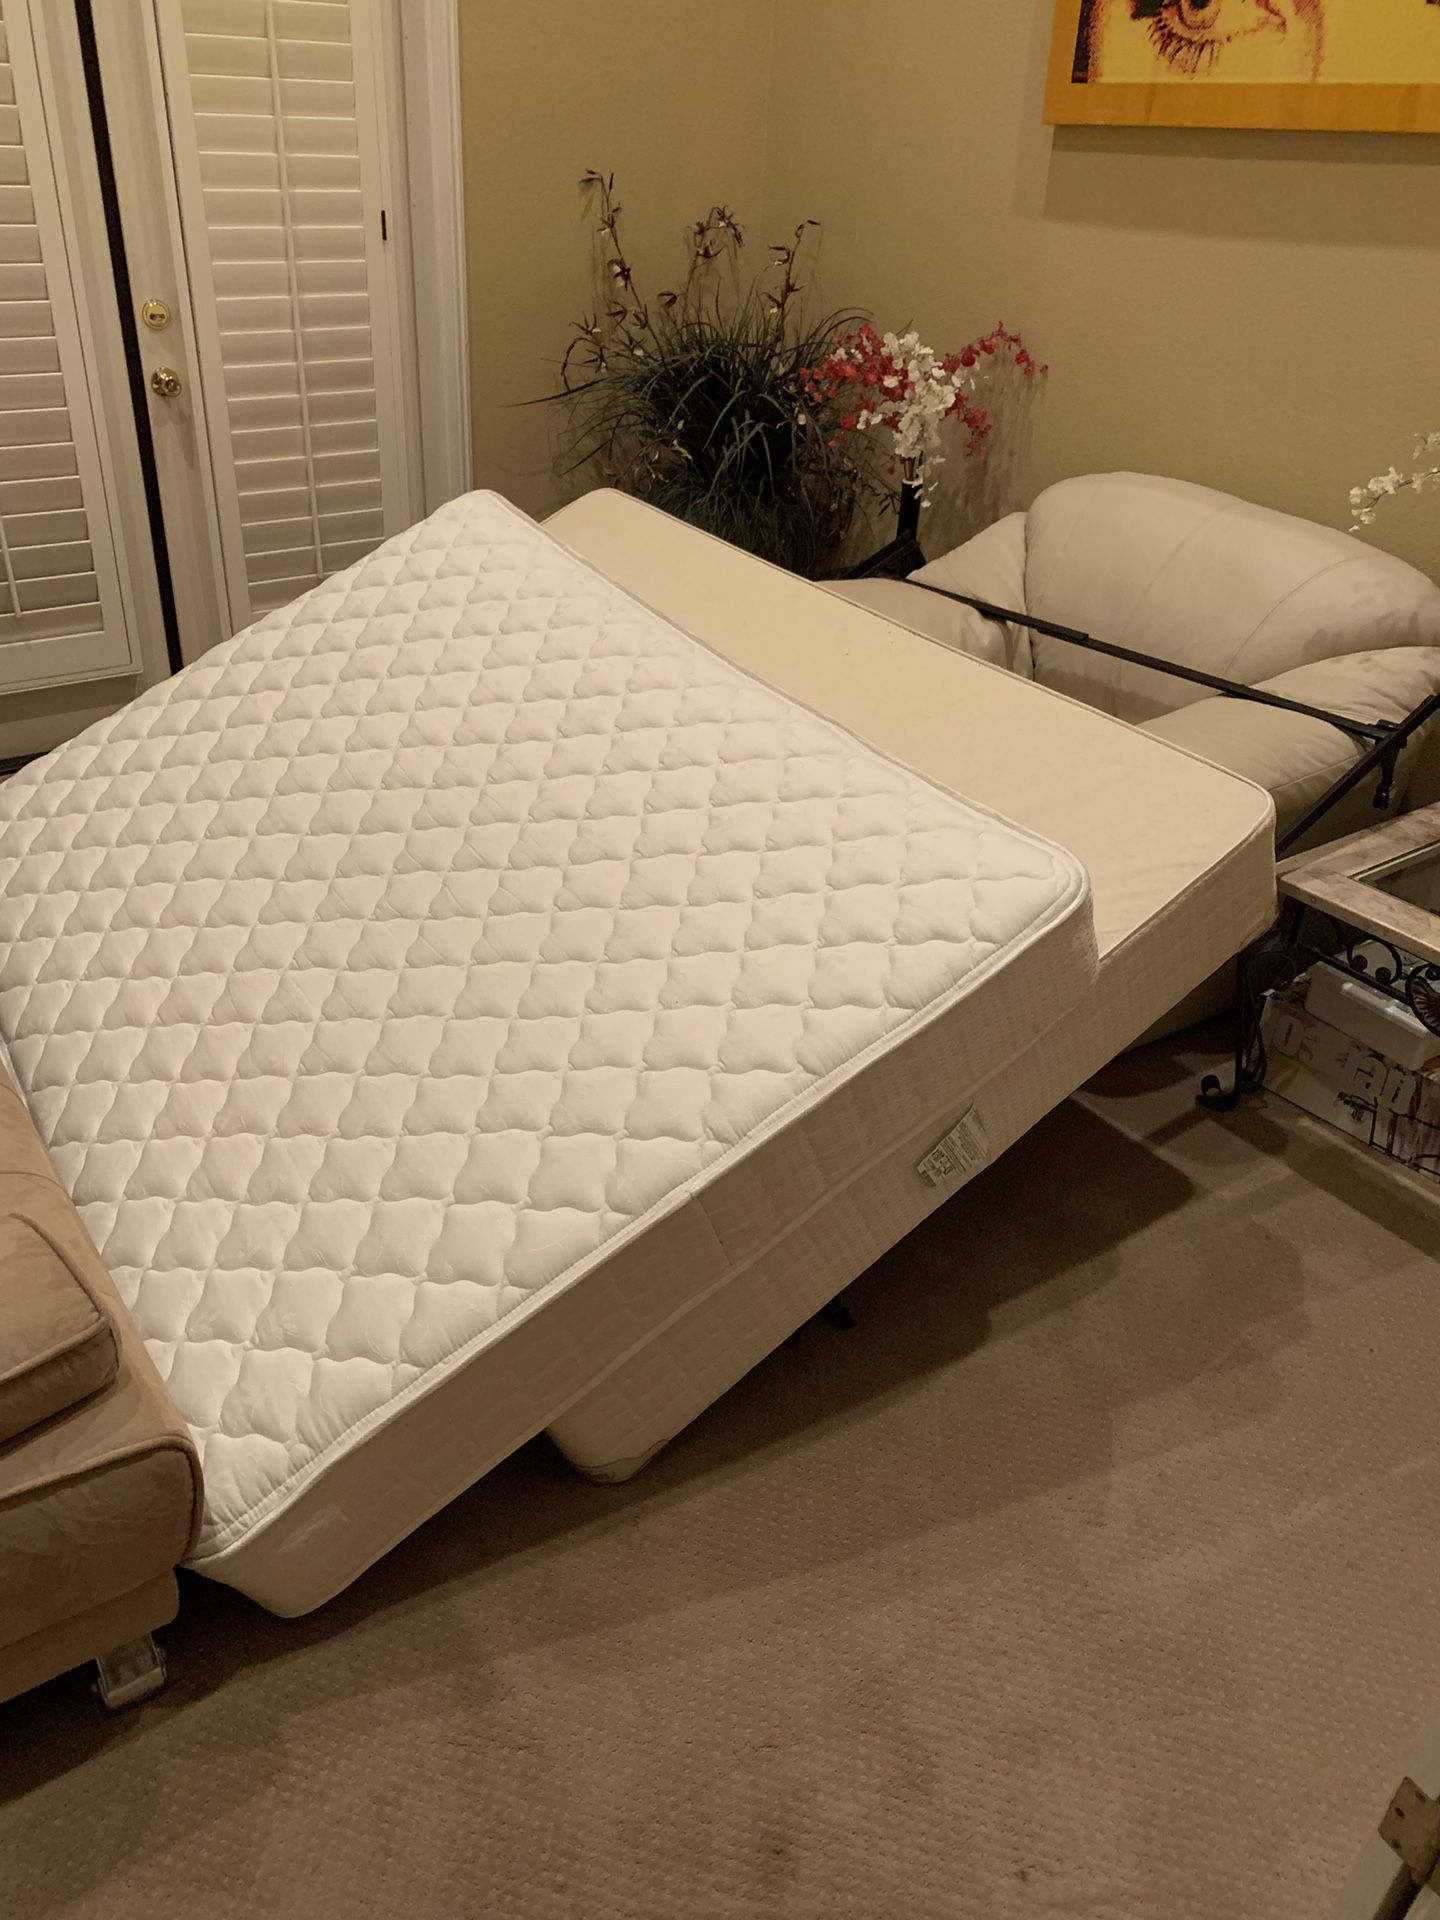 Free Full mattress, box springs and frame